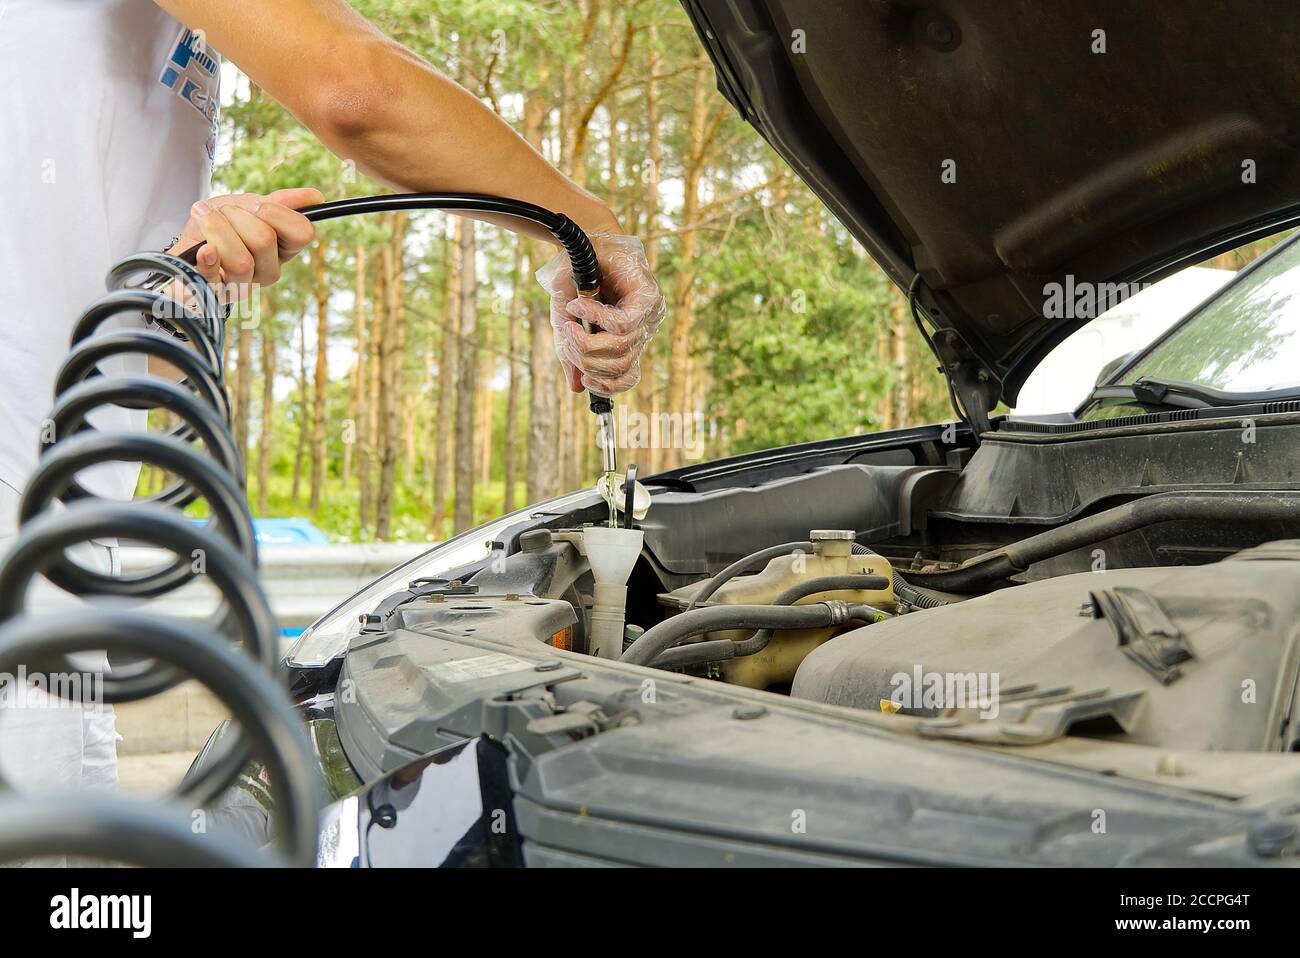 Closeup Of Man Topping Up Windshield Washer Fluid In Car Stock Photo -  Download Image Now - iStock